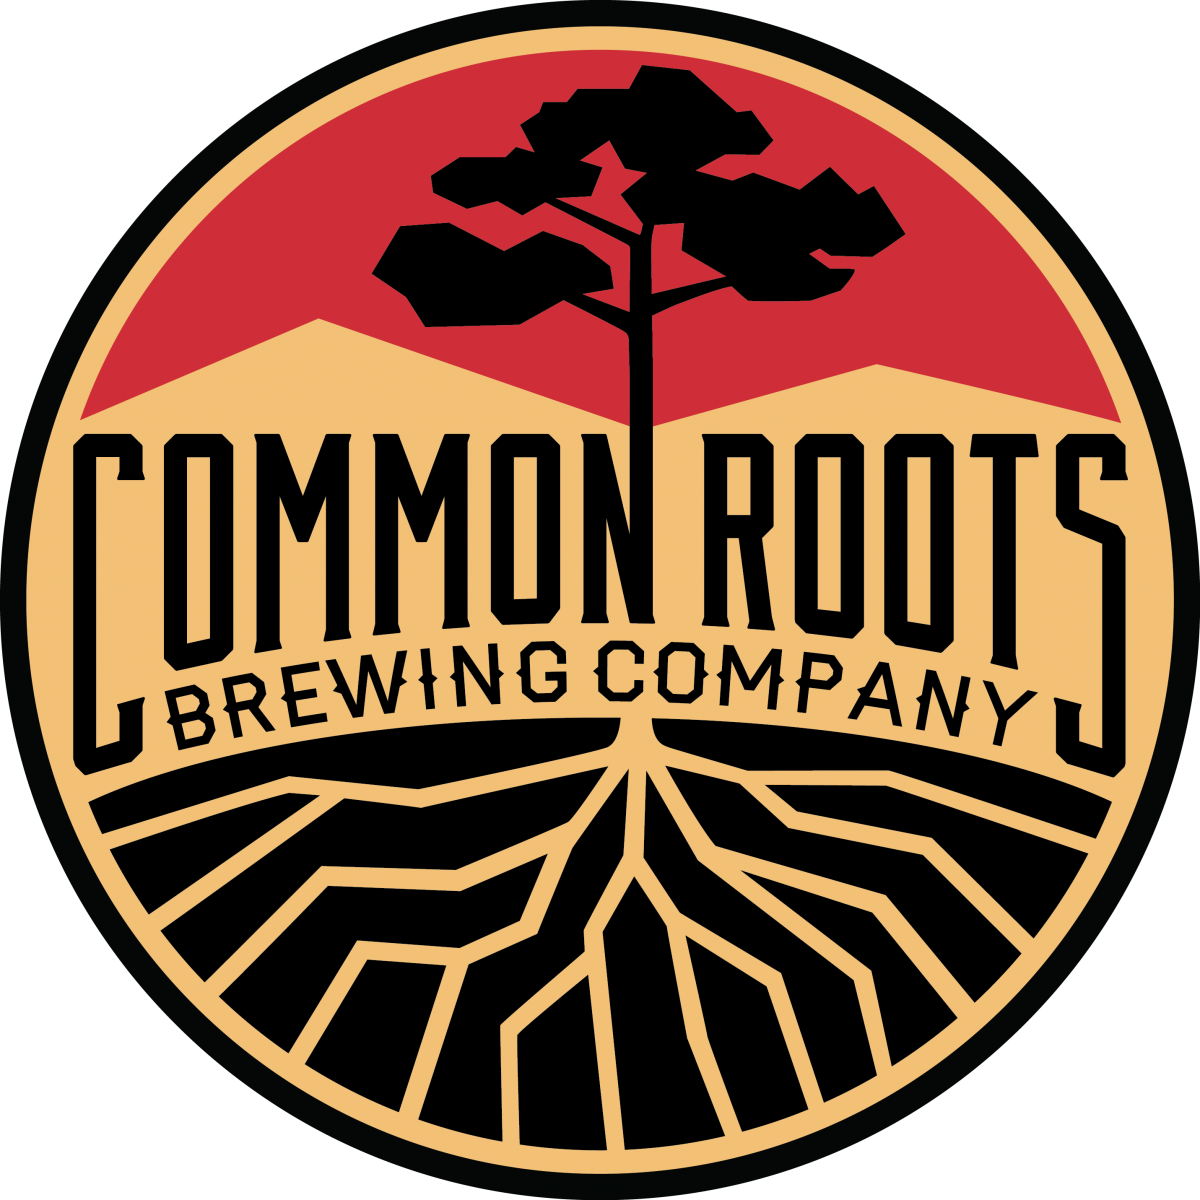 Image for Fitness and Beer Work Together at Common Roots Brewing Company